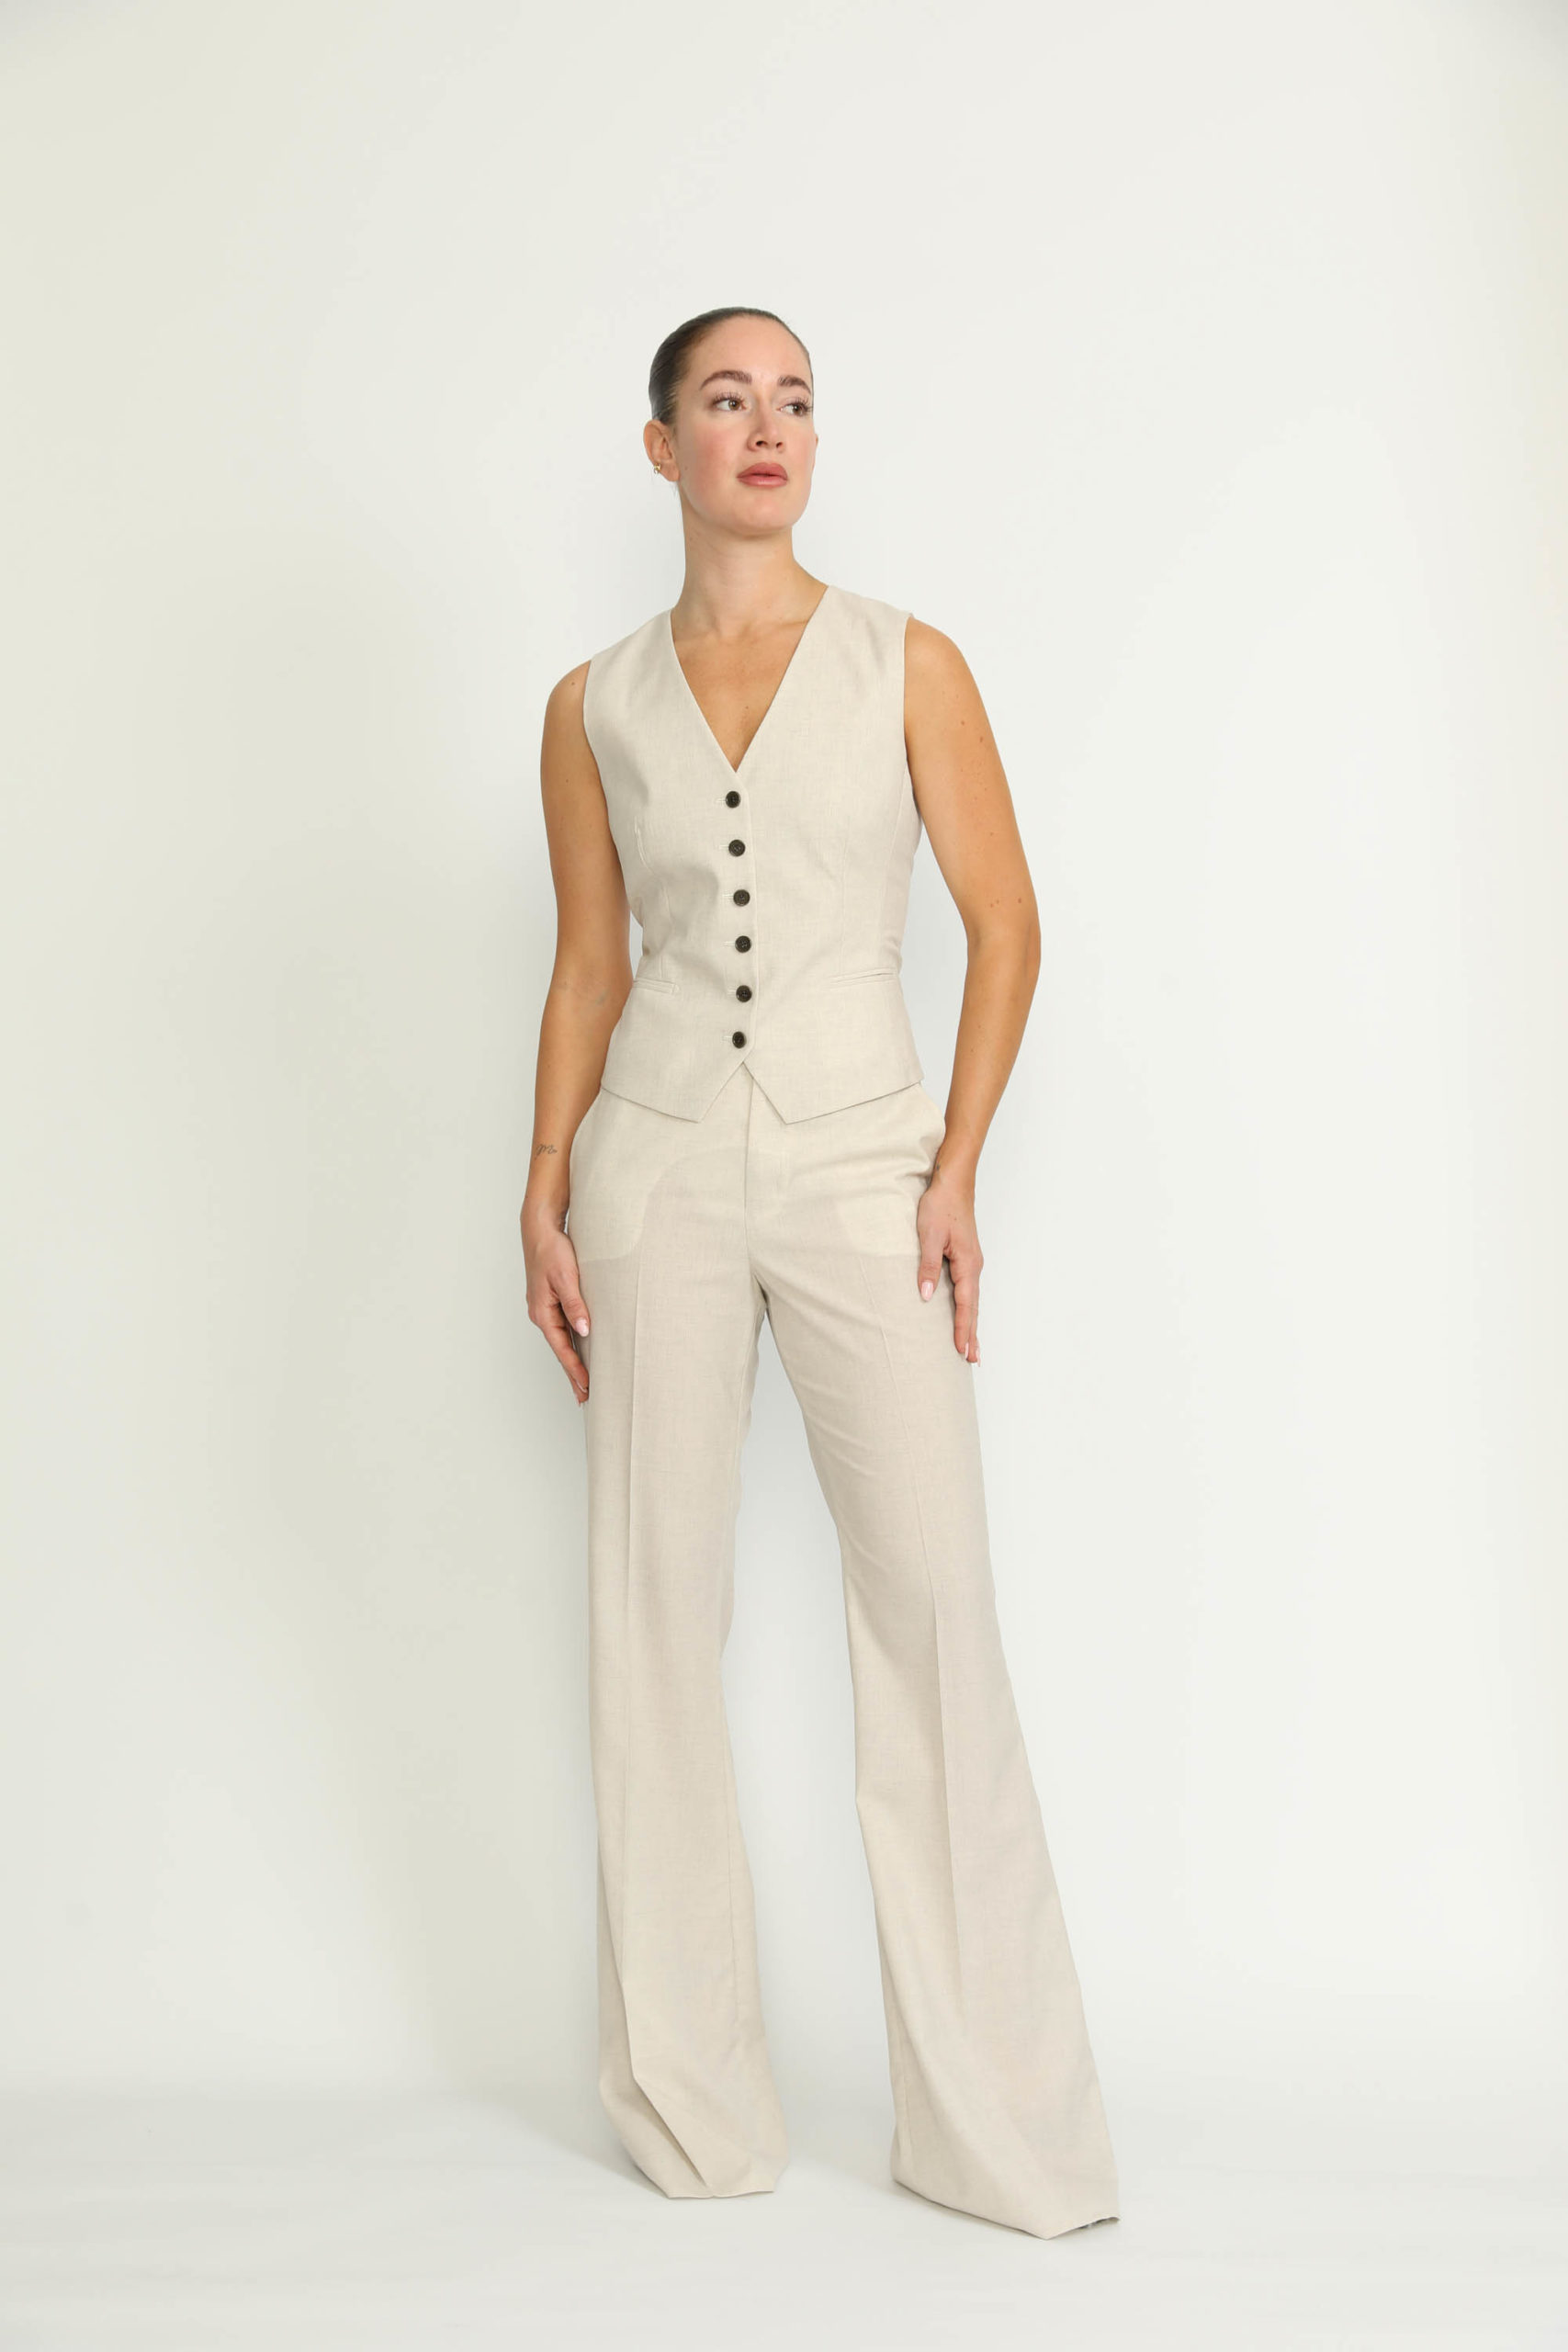 Sursee Trousers – Sursee Bell Bottom Flared Vanilla White Trousers0